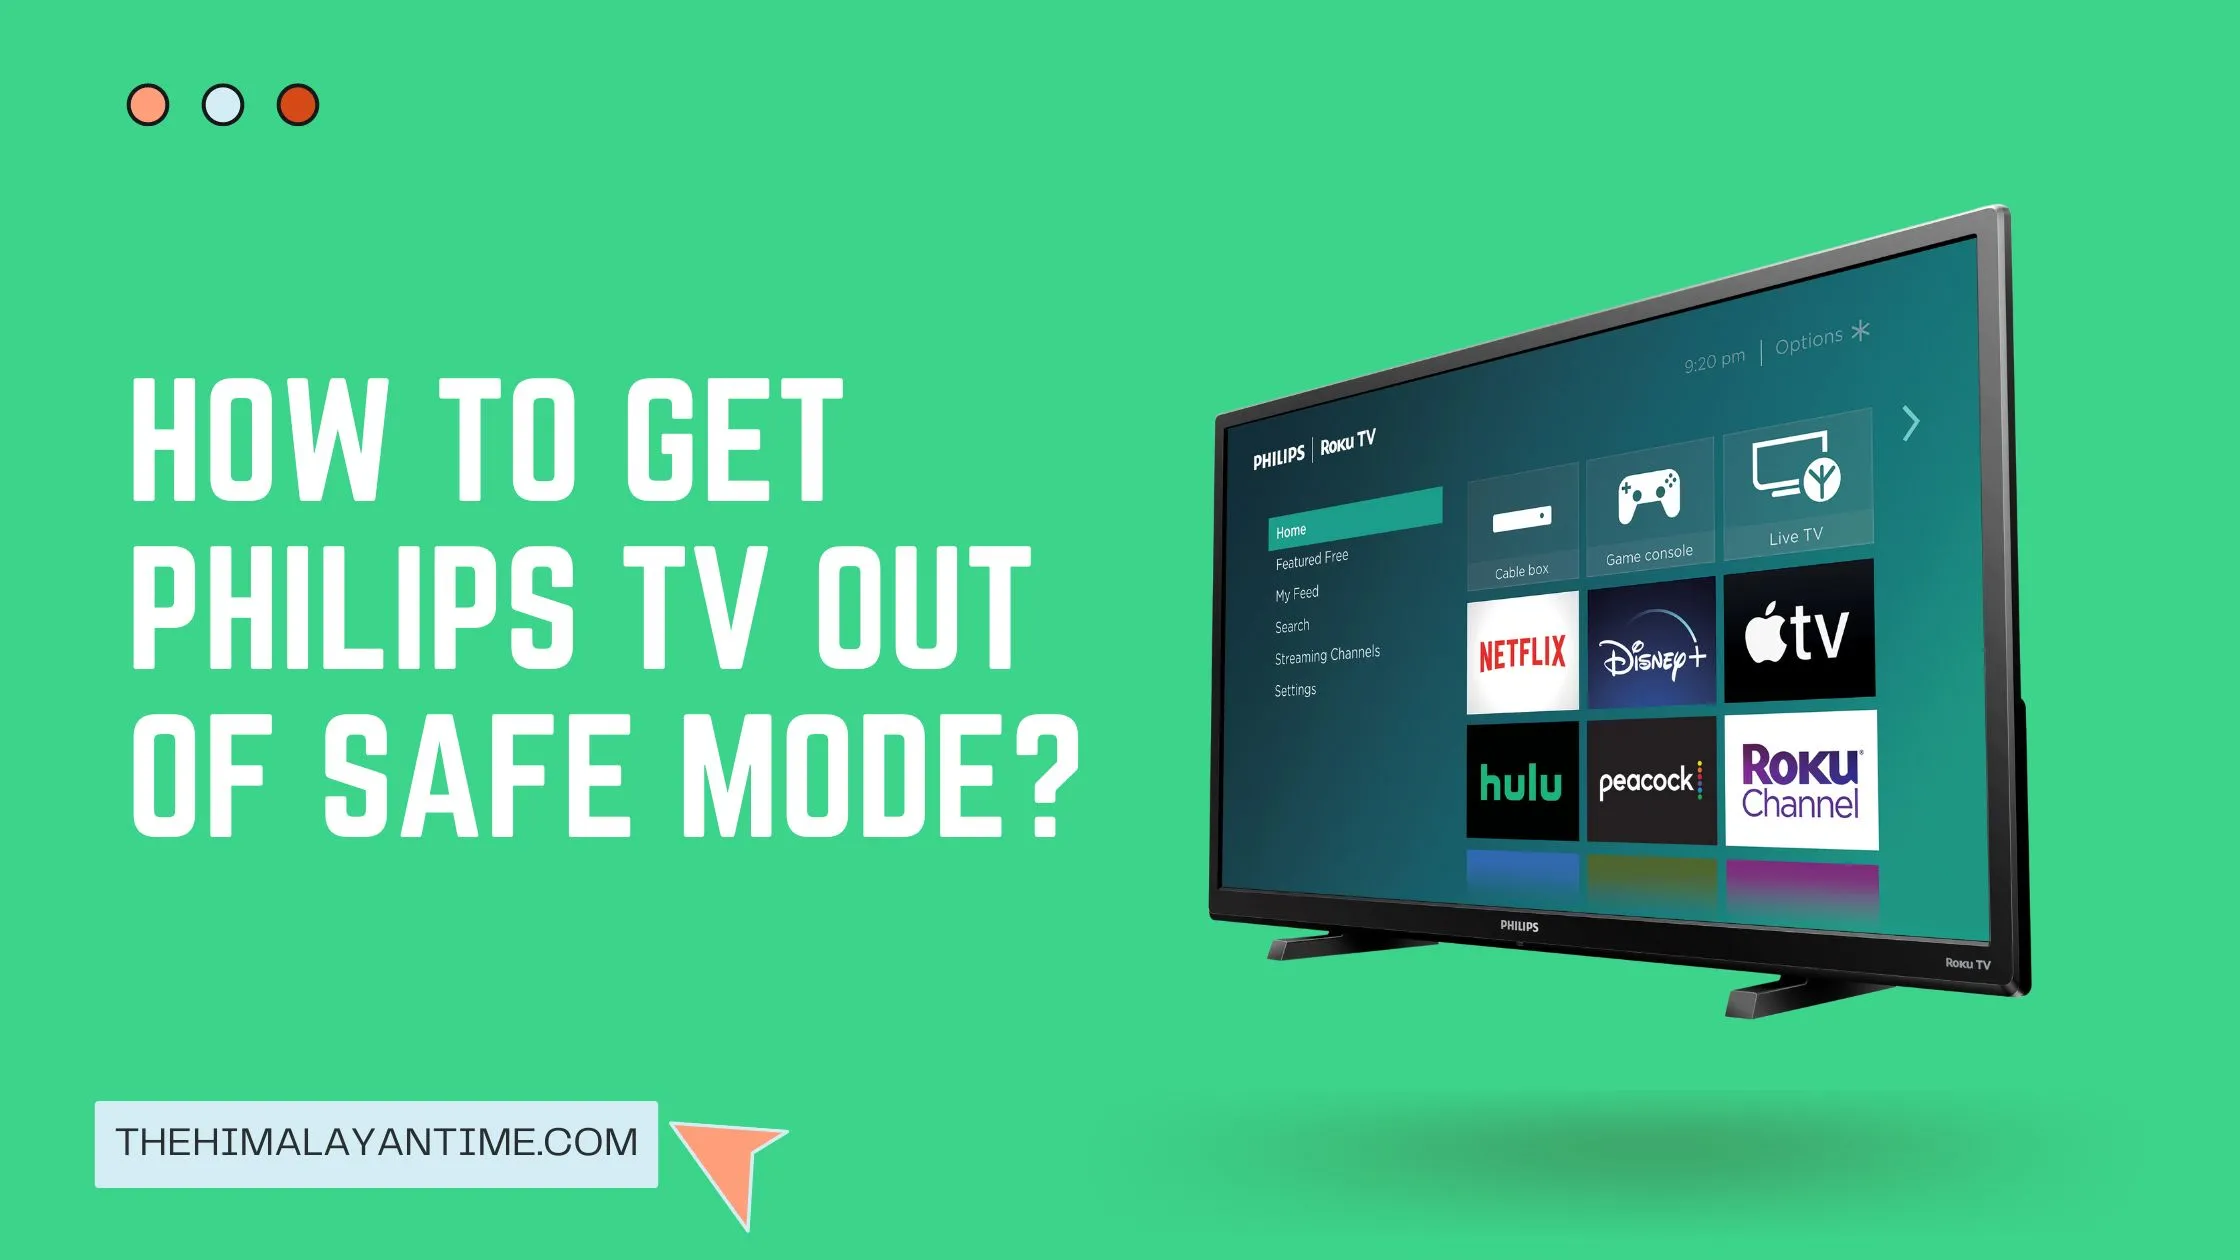 Get Philips TV Out of Safe Mode